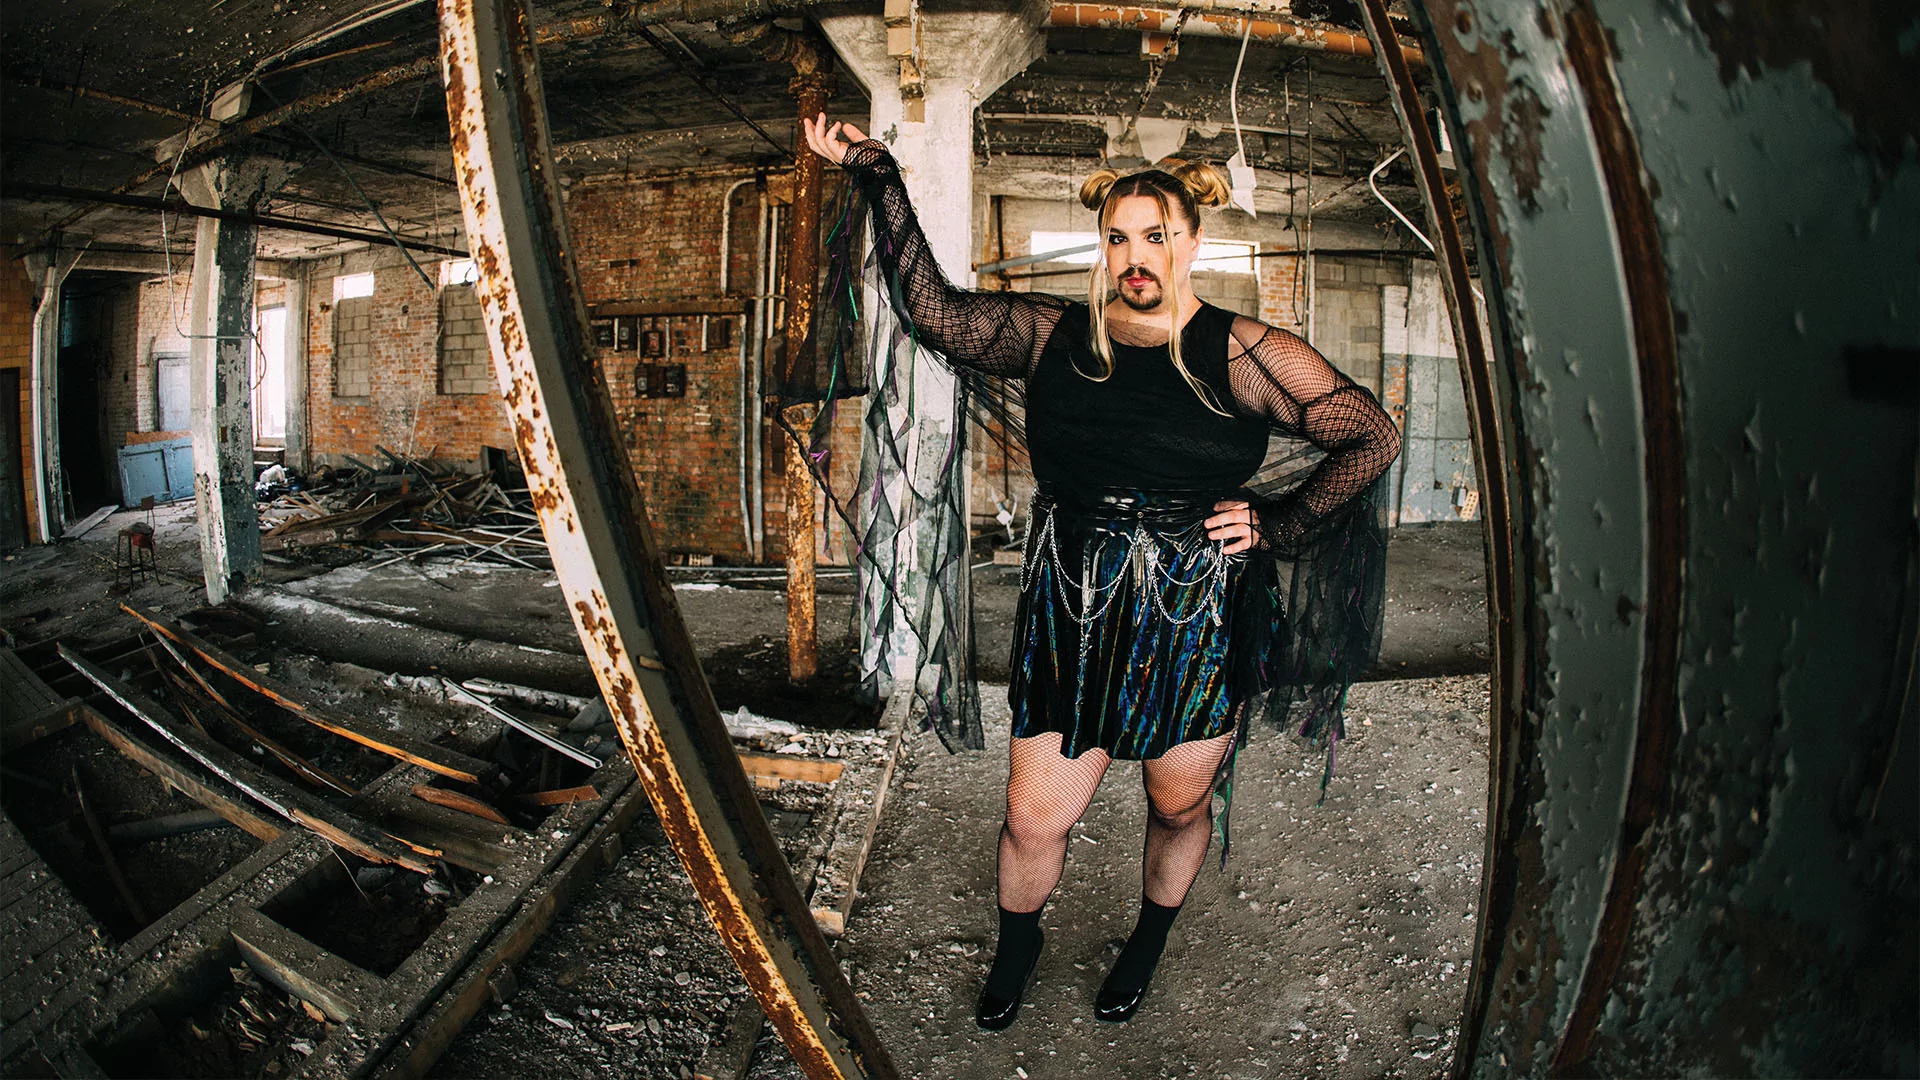 Wreckno standing in a derelict building in a black skirt and top with flowing extensions and hair in buns